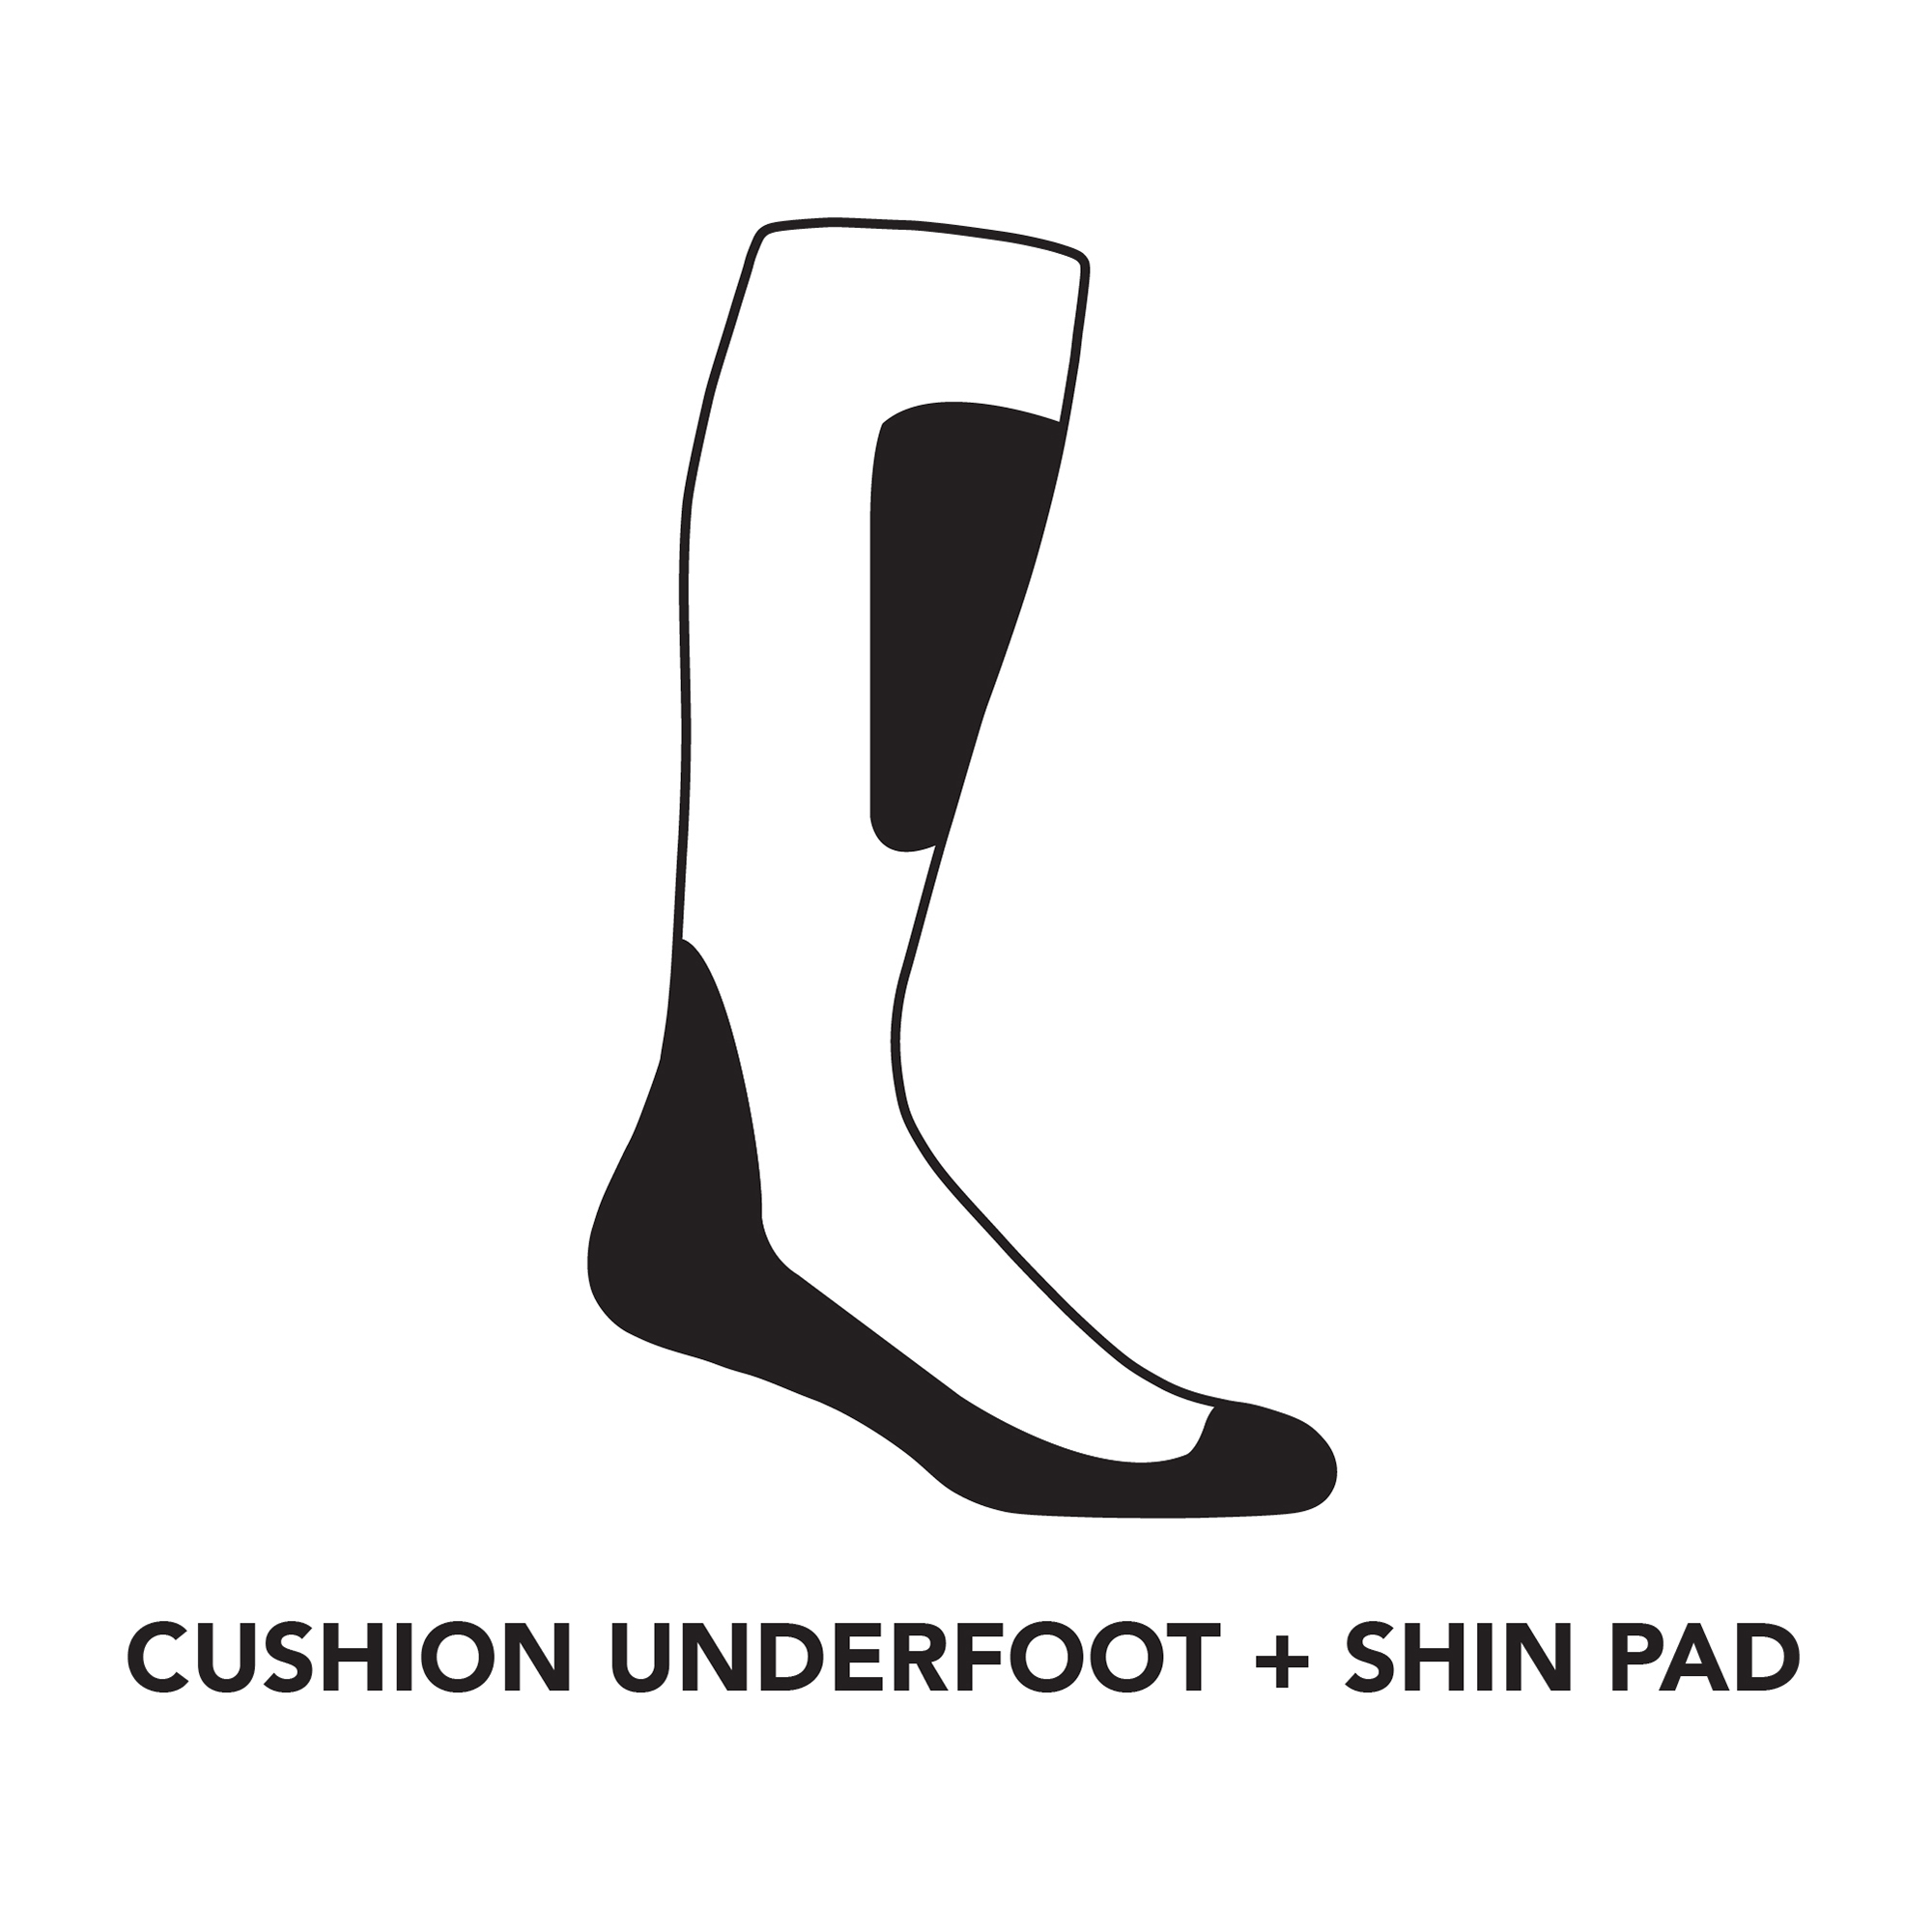 Over-the-calf cushion map image showing cushioning underfoot and on the shin